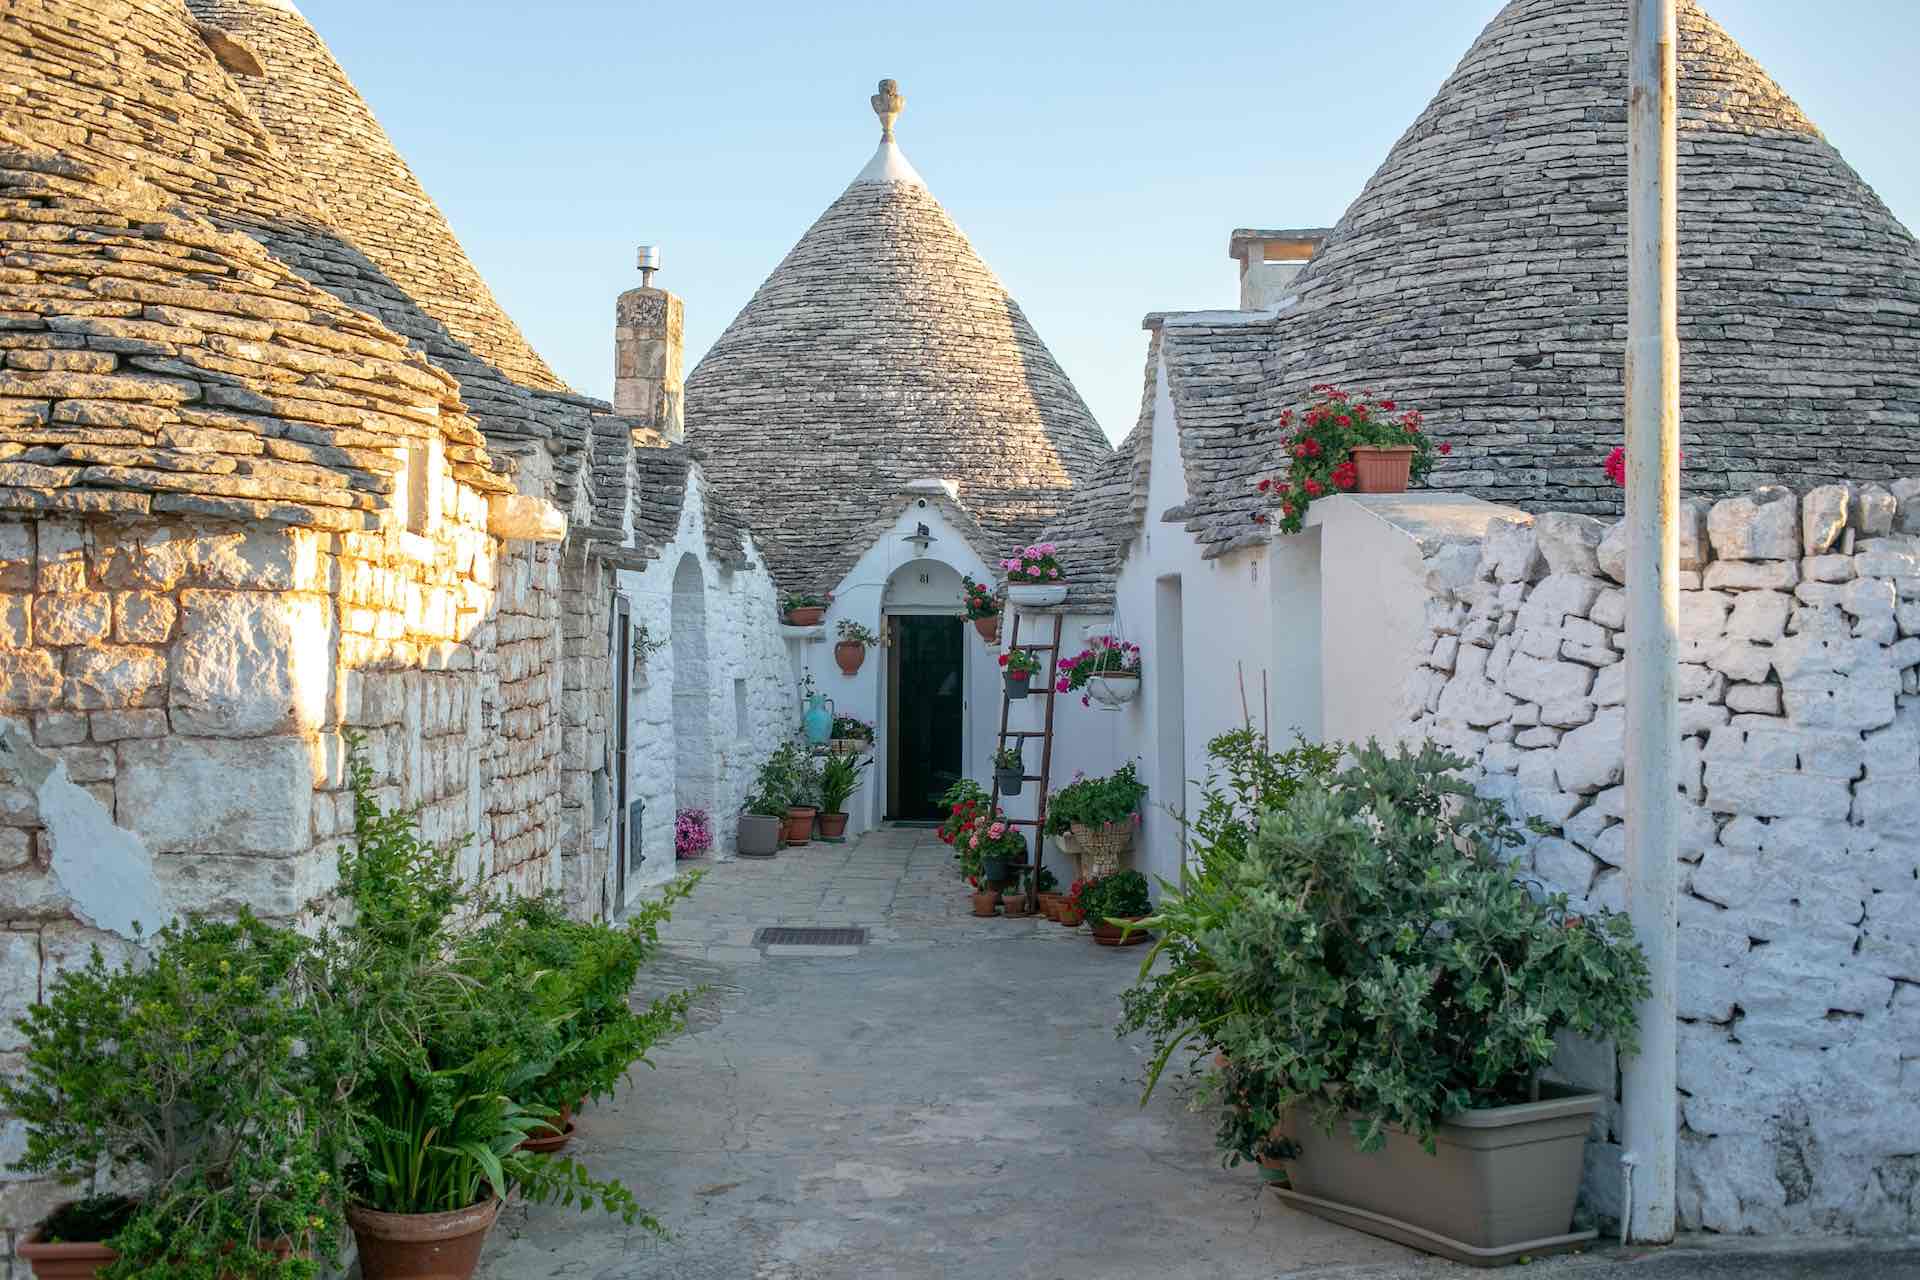 A quaint street of Trulli houses in Puglia, partially glowing in the golden hour light. Potted plants and bushes line the alley.